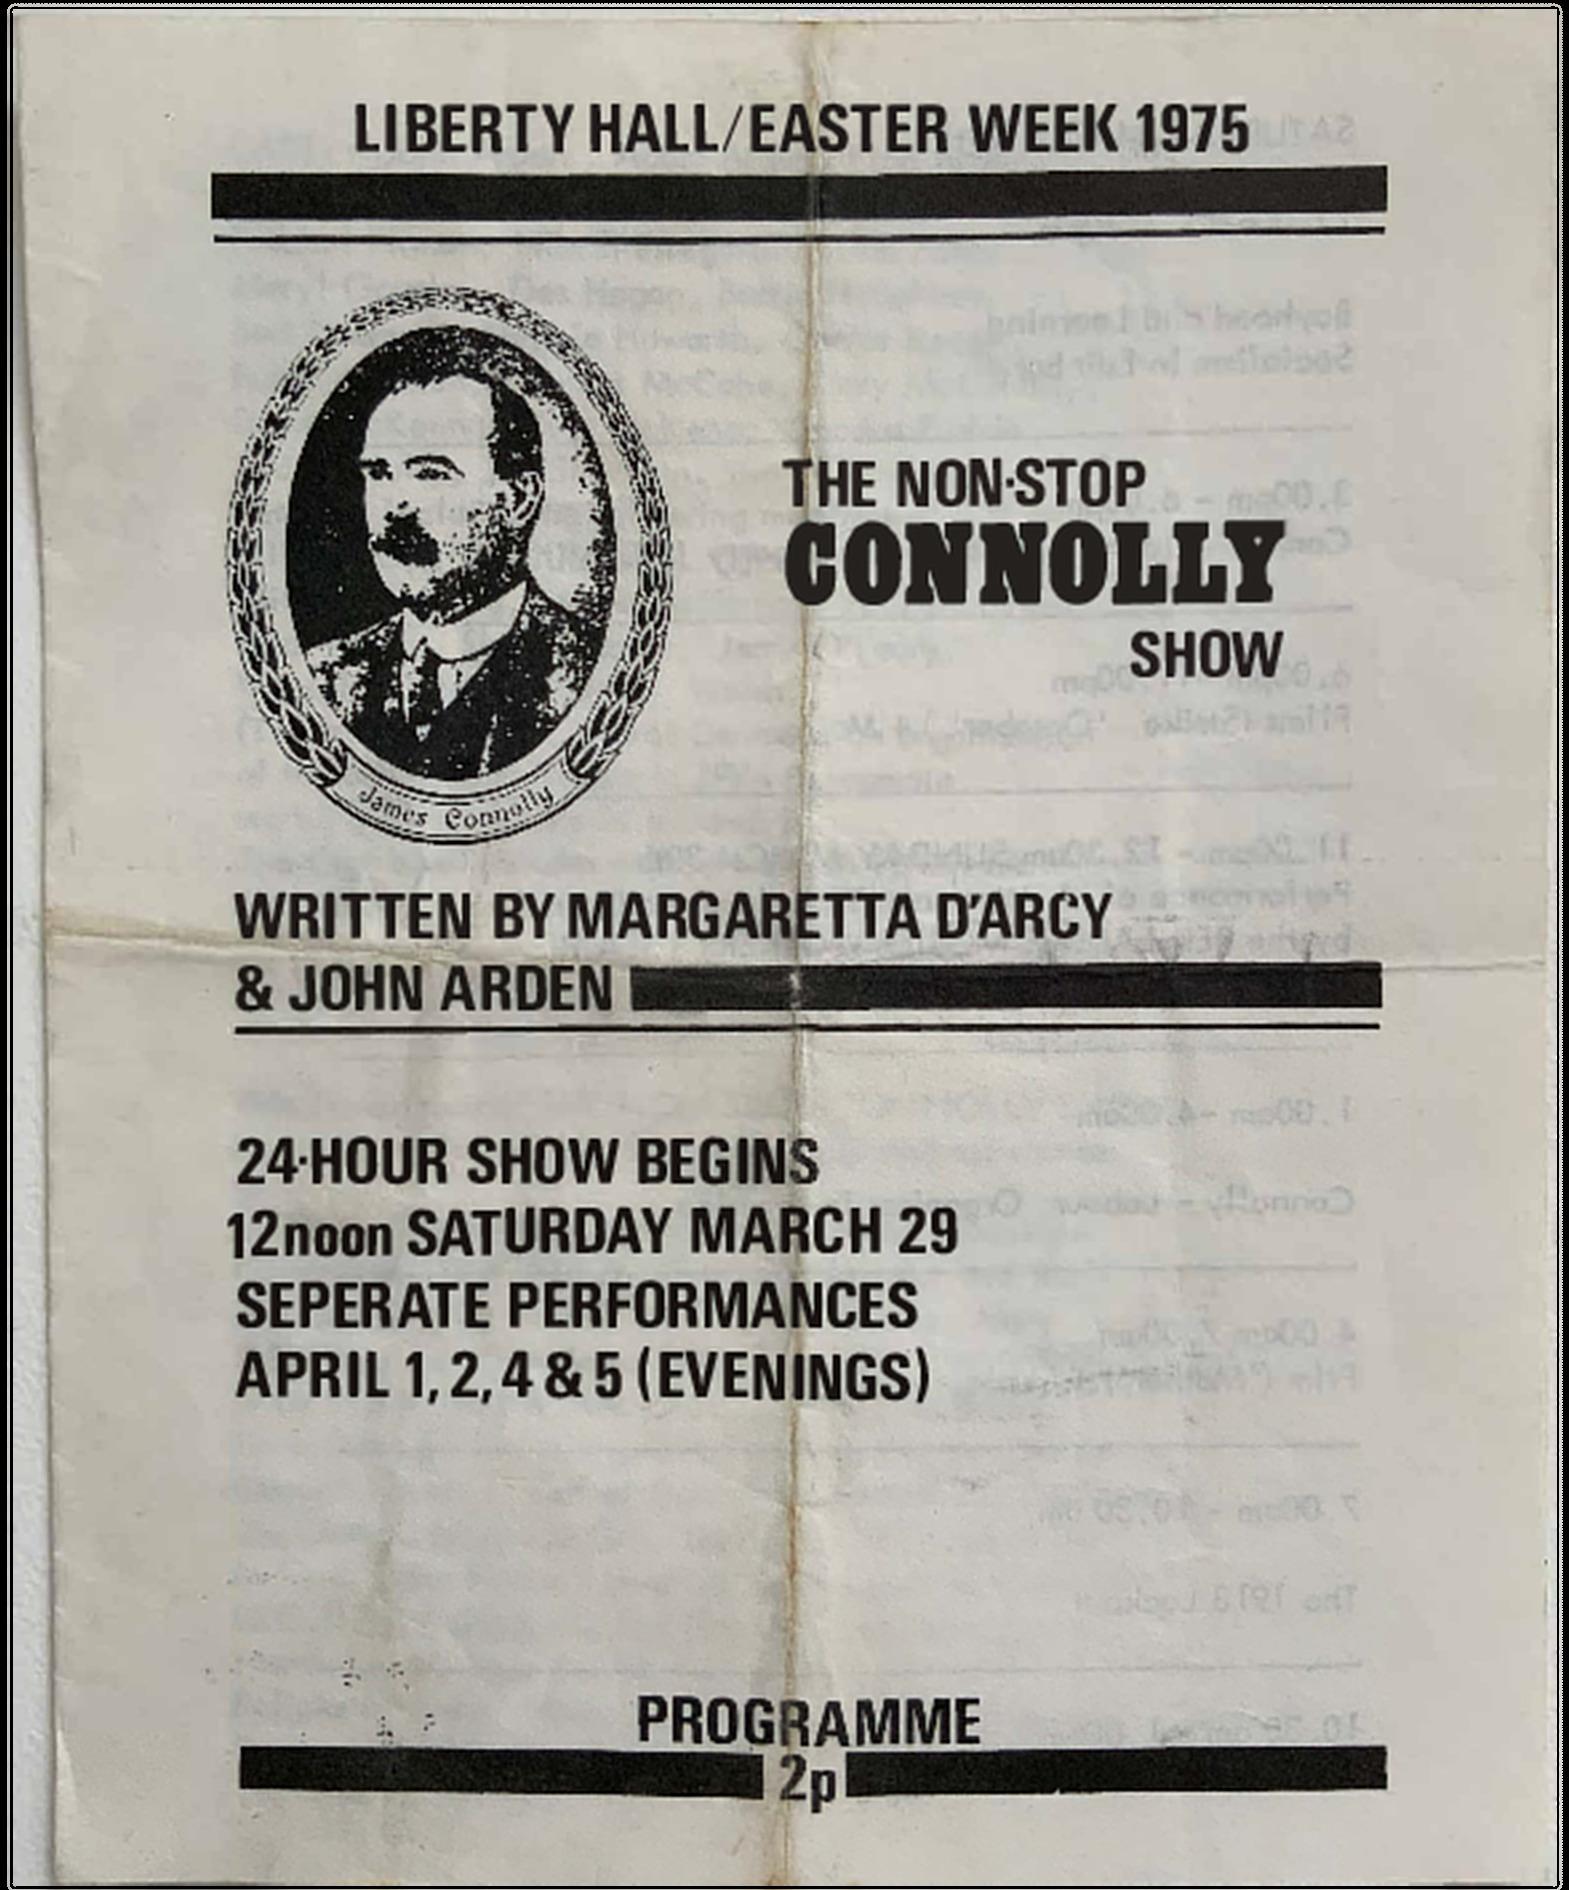 A black and white leaflet with a picture of James Connolly, which reads: Liberty Hall / Easter Week 1975
The Non-Stop Connolly Show;
Written by Margaretta D’Arcy and John Arden;
24-hour show begins 12 noon Saturday March 29;
Separate performances April, 1, 2, 4 & 5 (evenings);
Programme 2p